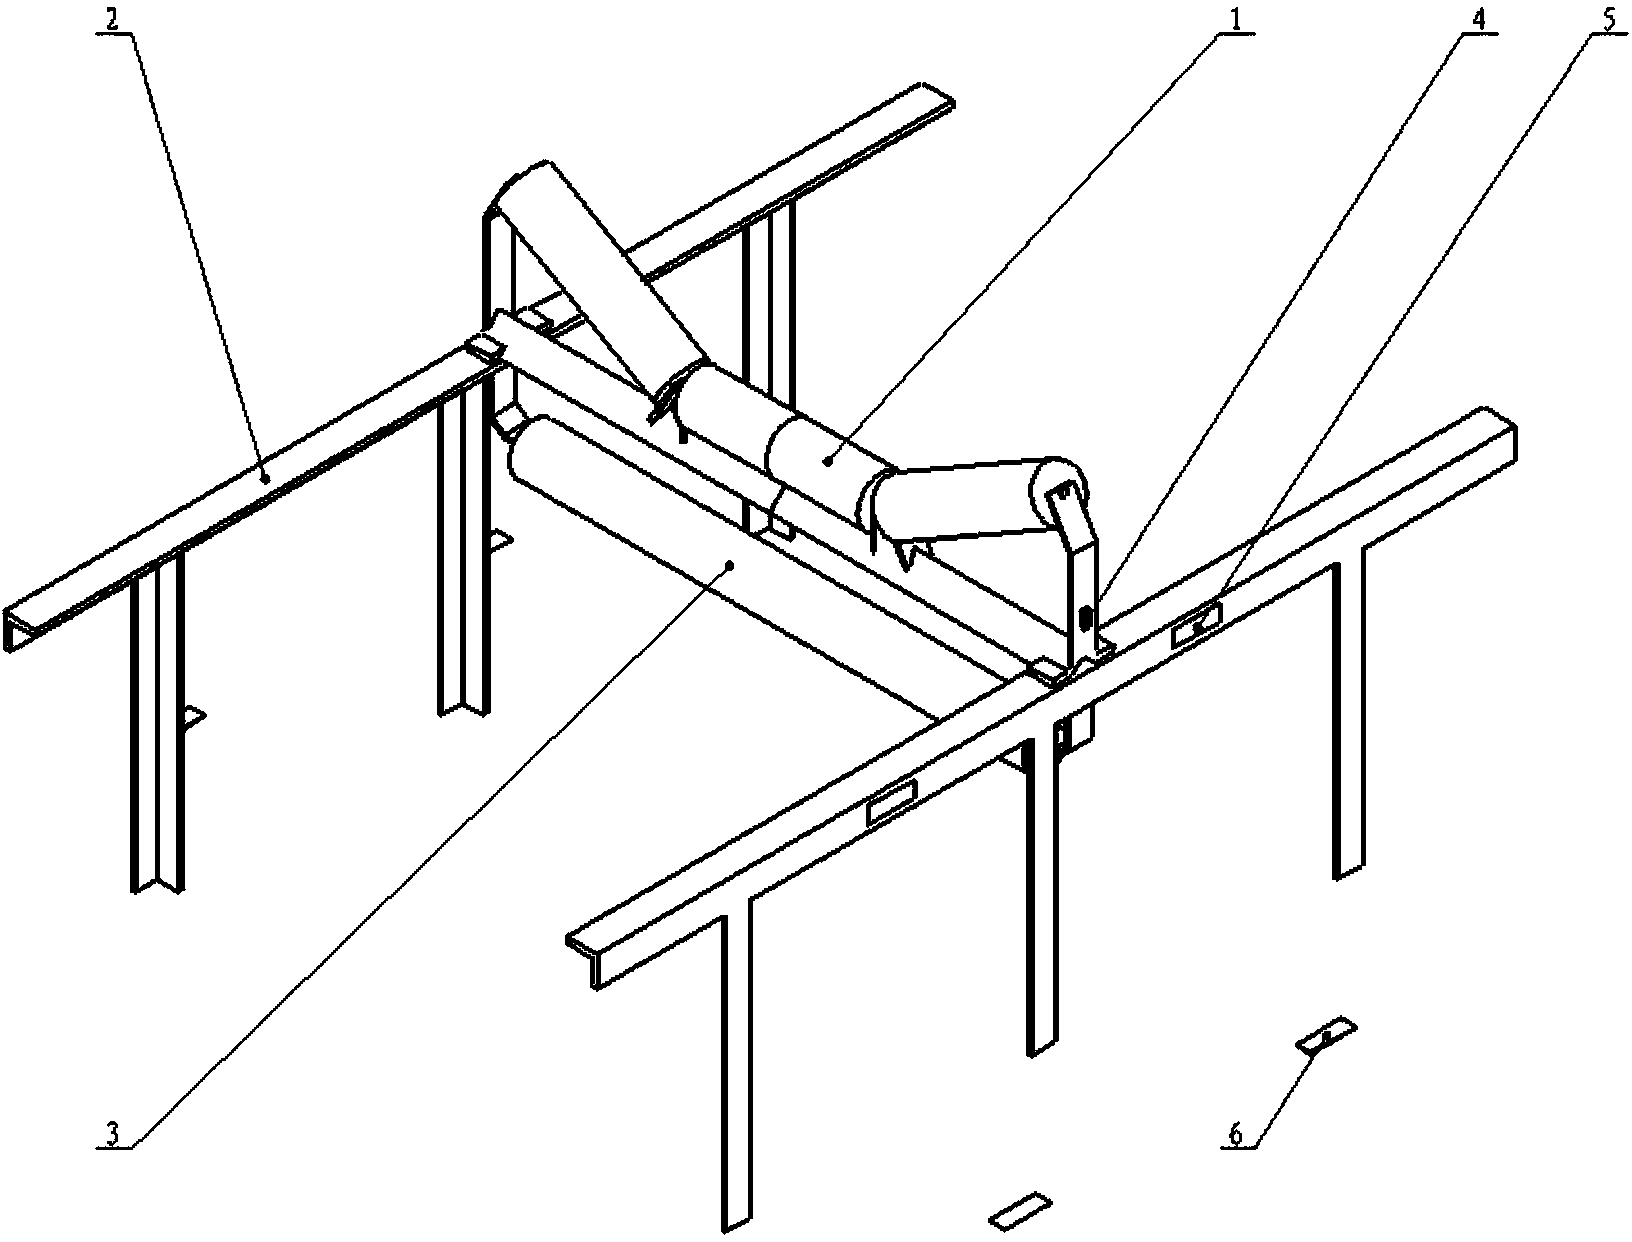 Belt conveyor automatic inspection system and method based on multi-rotor unmanned aerial vehicle